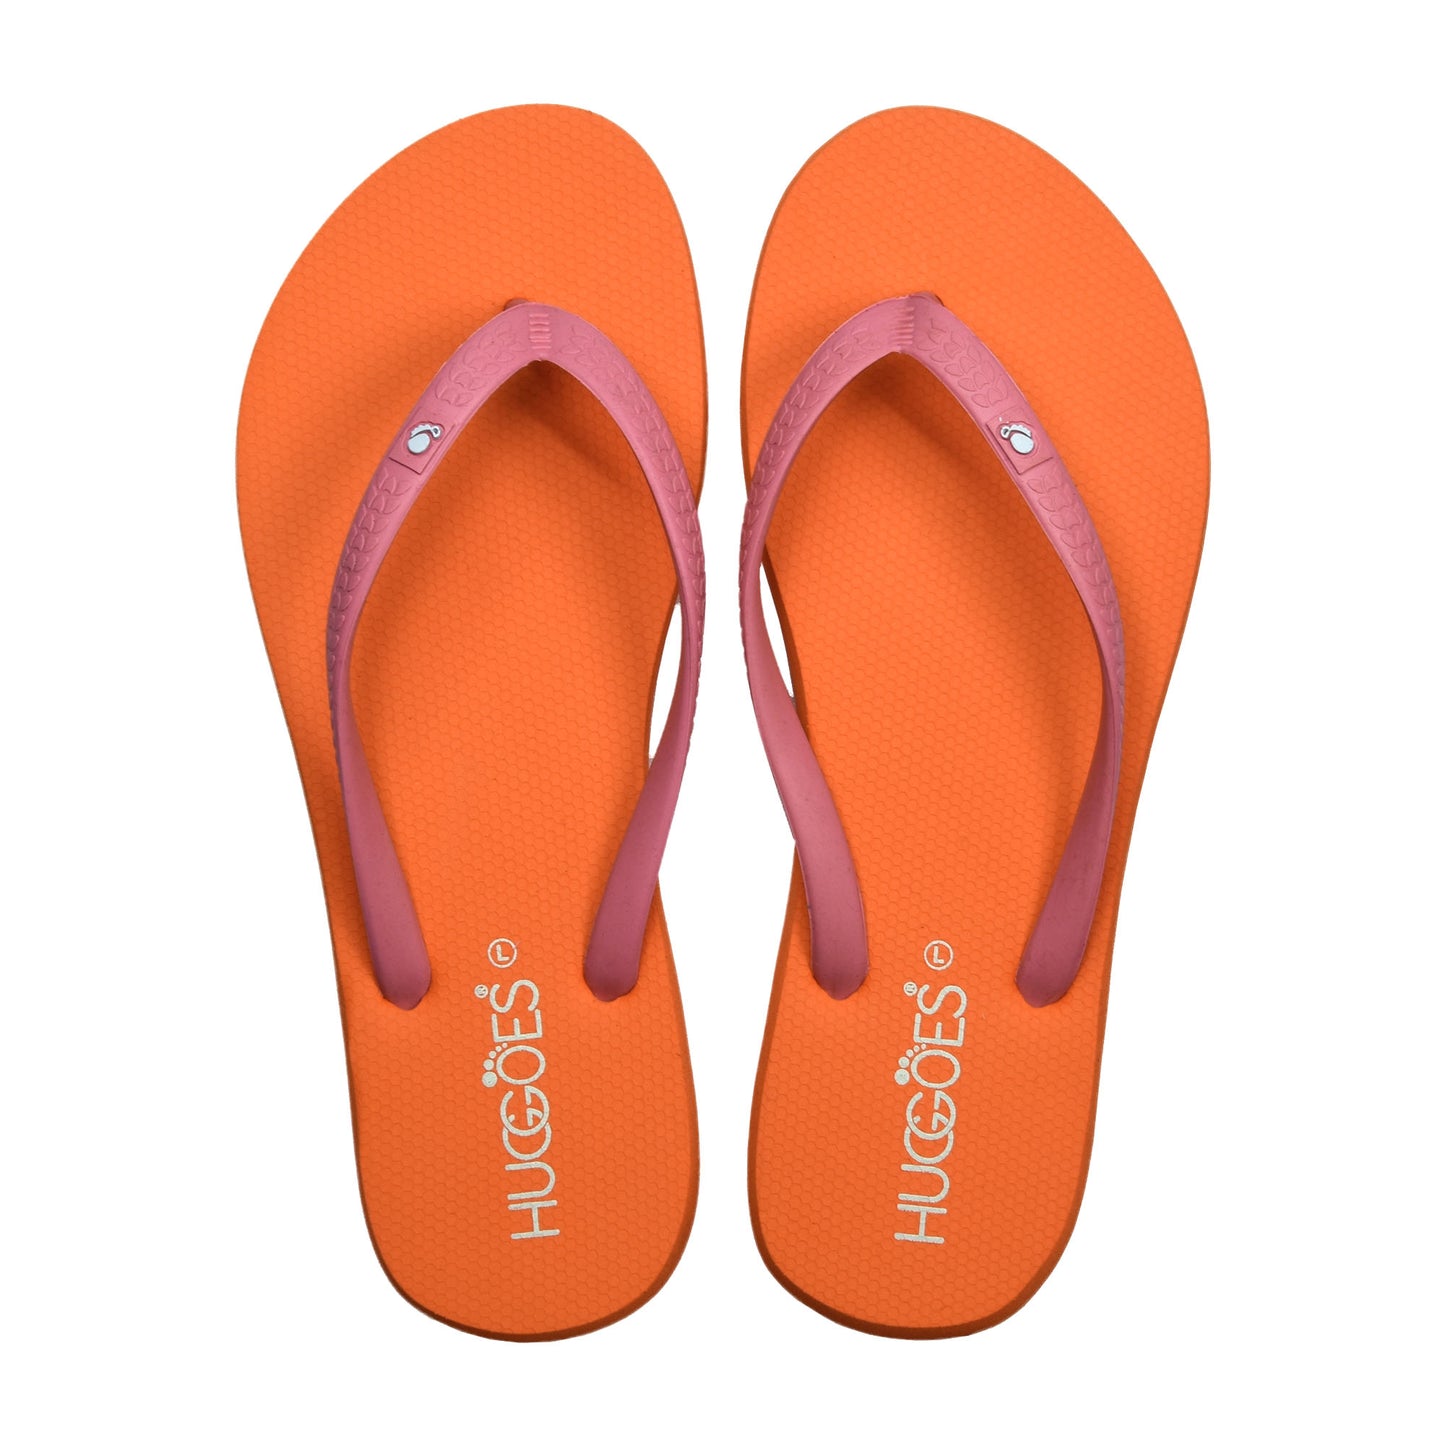 Huggoes By Aerothotic - Monarch Women's Natural Rubber Summer Flip-Flops - Original Thailand Imported - (OR1)